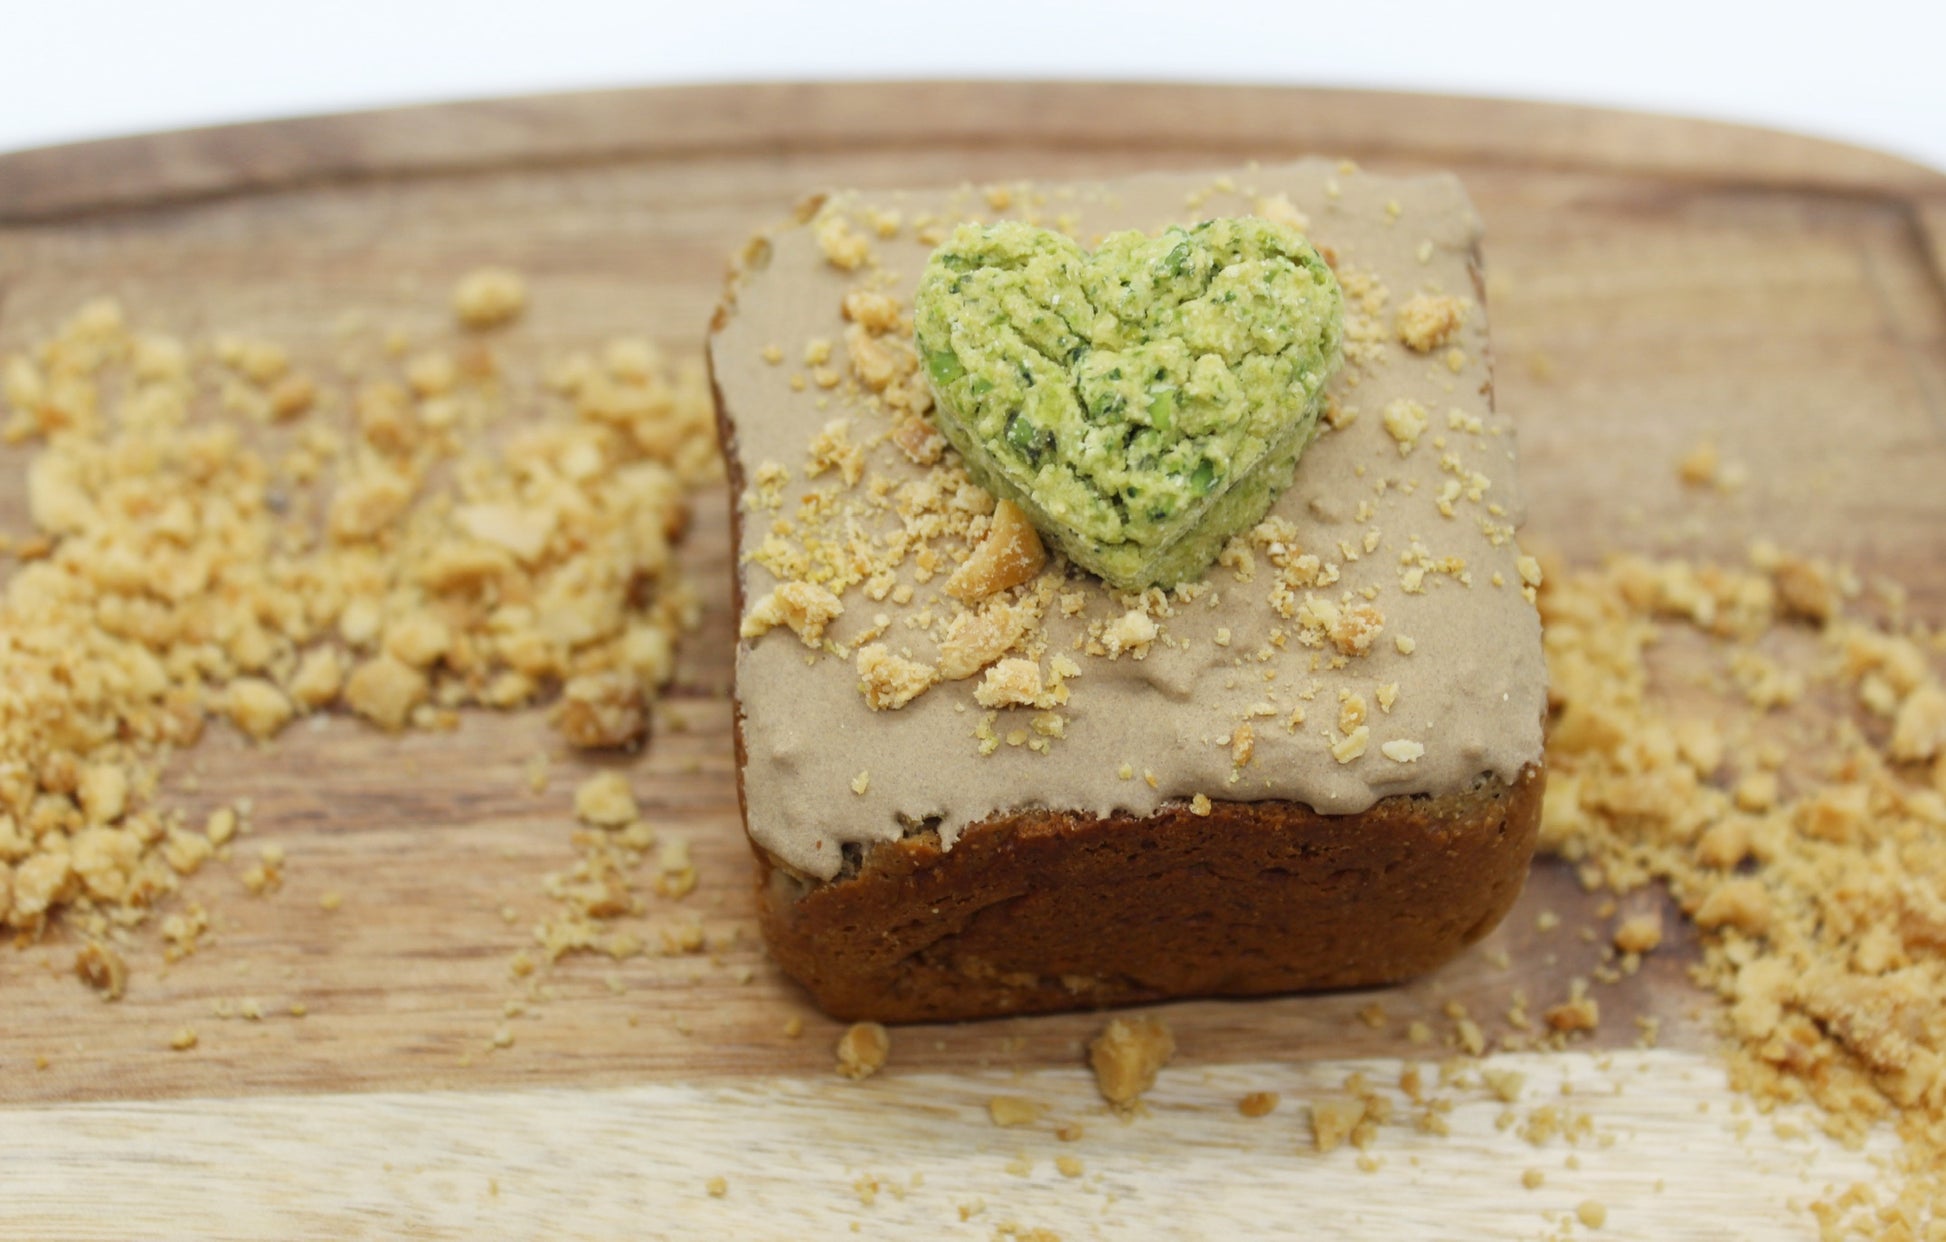 A mini dog cake with brown, carob frosting, peanuts and  flaxseed sprinkled on top. This yummy mini cake also has a heart shaped broccoli and peas training treat on top. The mini cake is displayed on a small cutting board with crushed peanuts and flaxseed sprinkled all around.